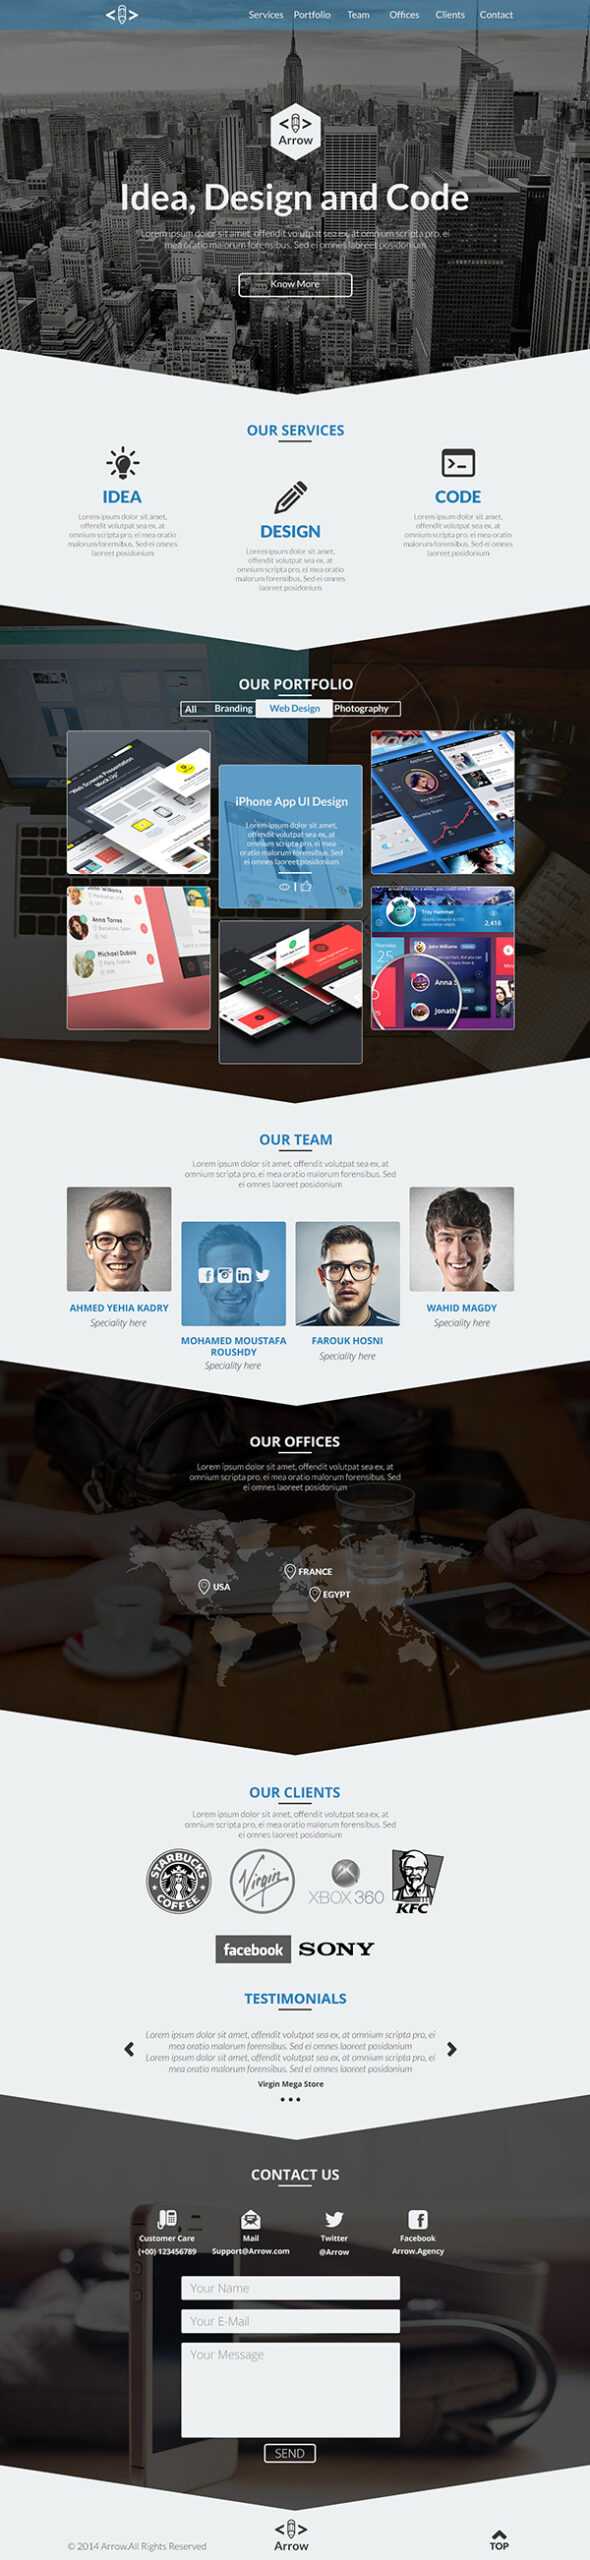 Psd Templates: 20 One Page Free Web Templates | Freebies Within Single Page Brochure Templates Psd